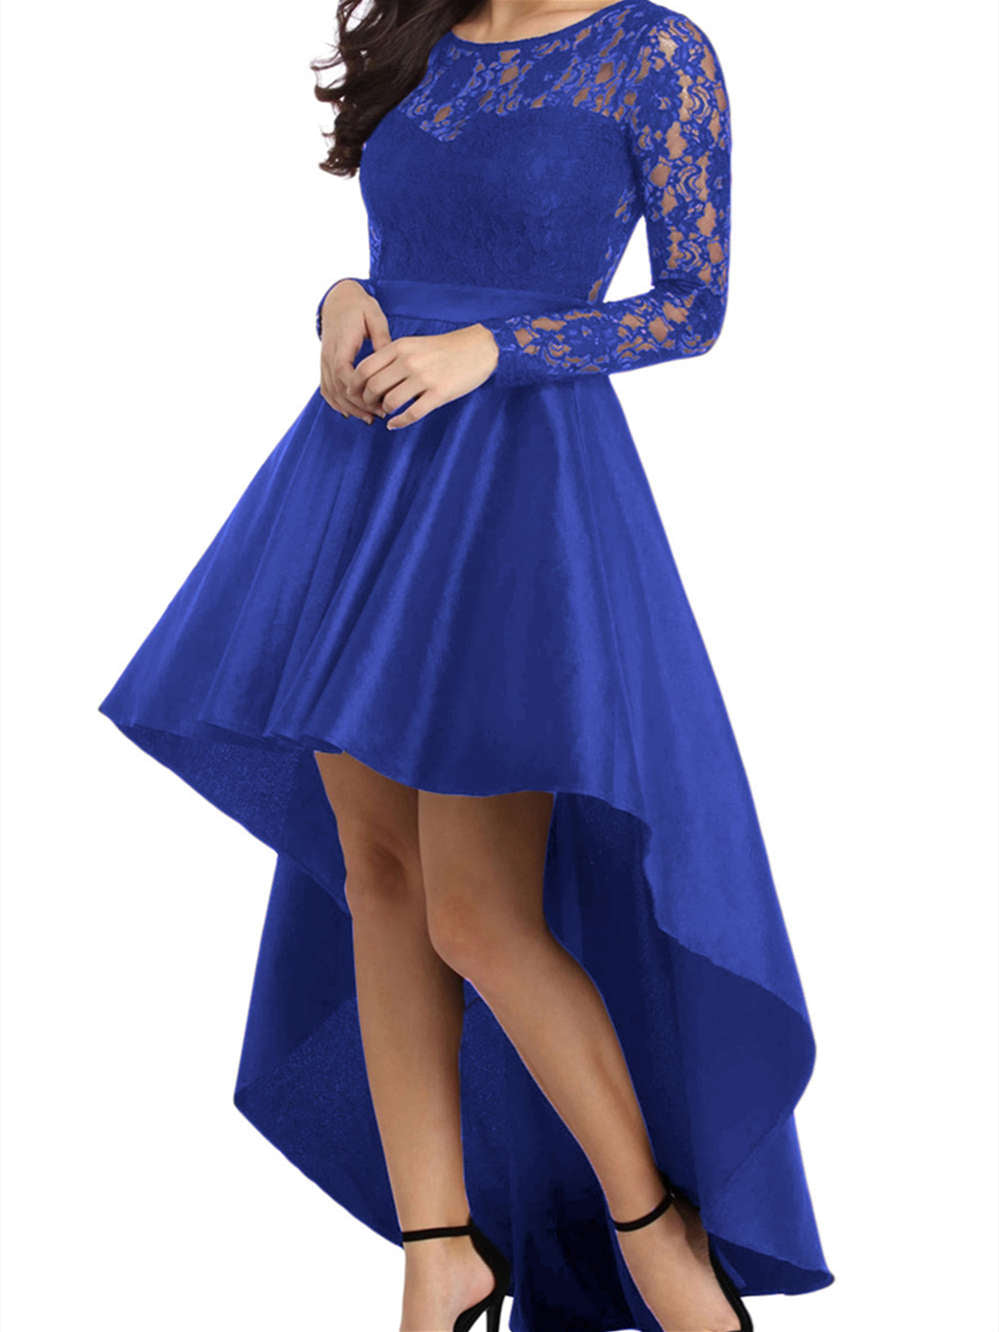 Long Sleeve Lace High Low Satin Party Evening Dress Prom Dress